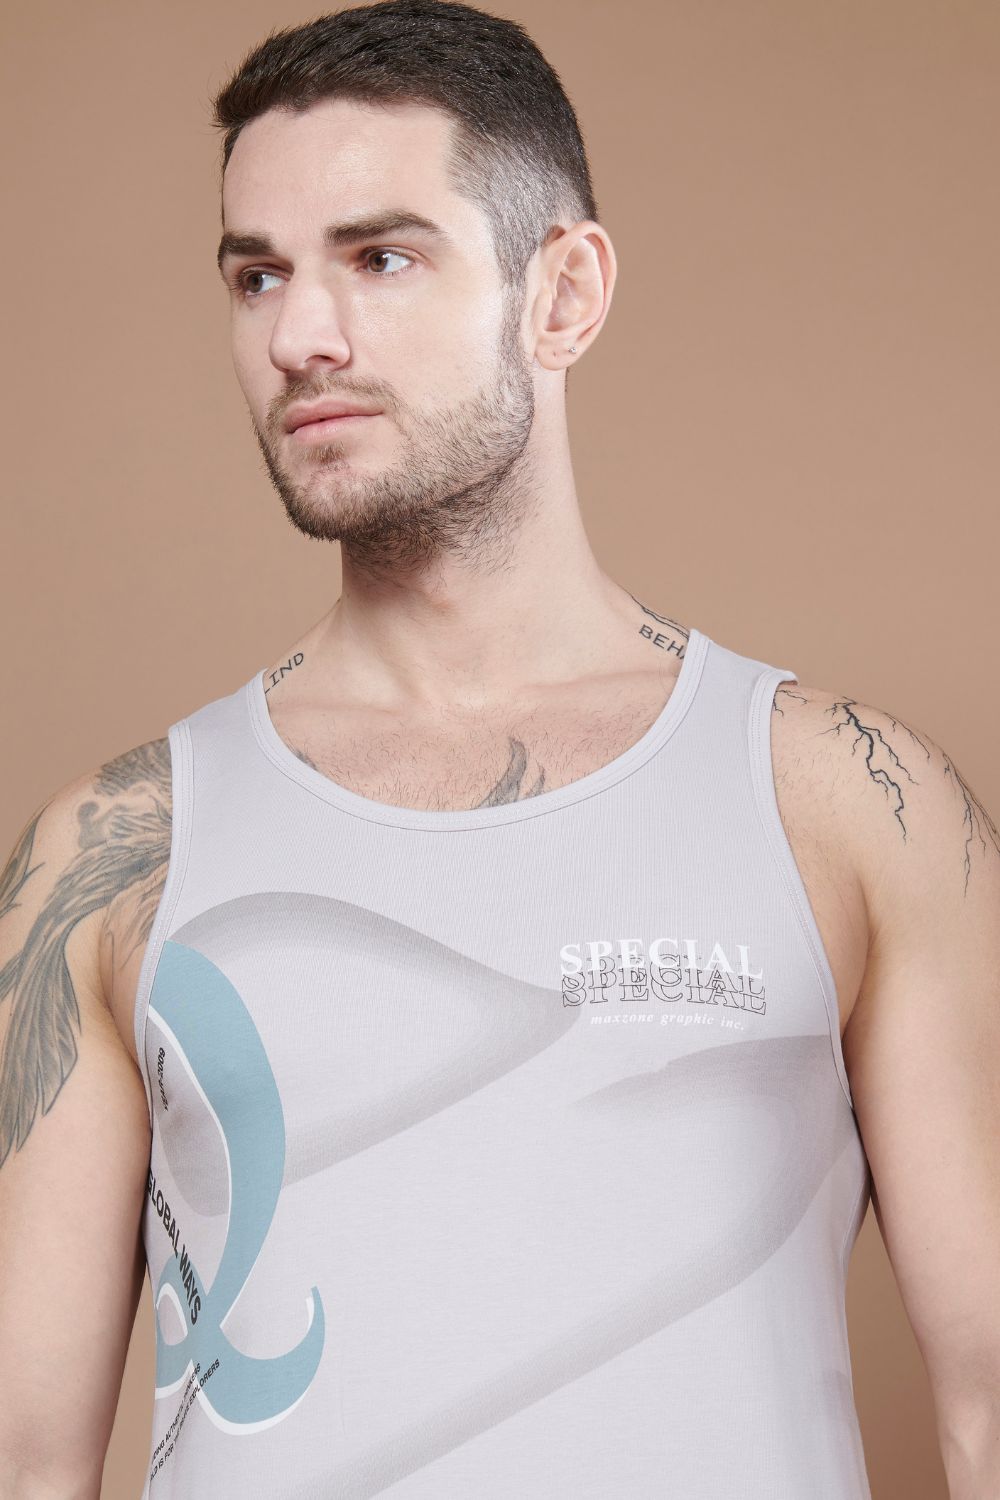 Silver colored cotton Sleeveless Printed Tank Tees for men, front view.